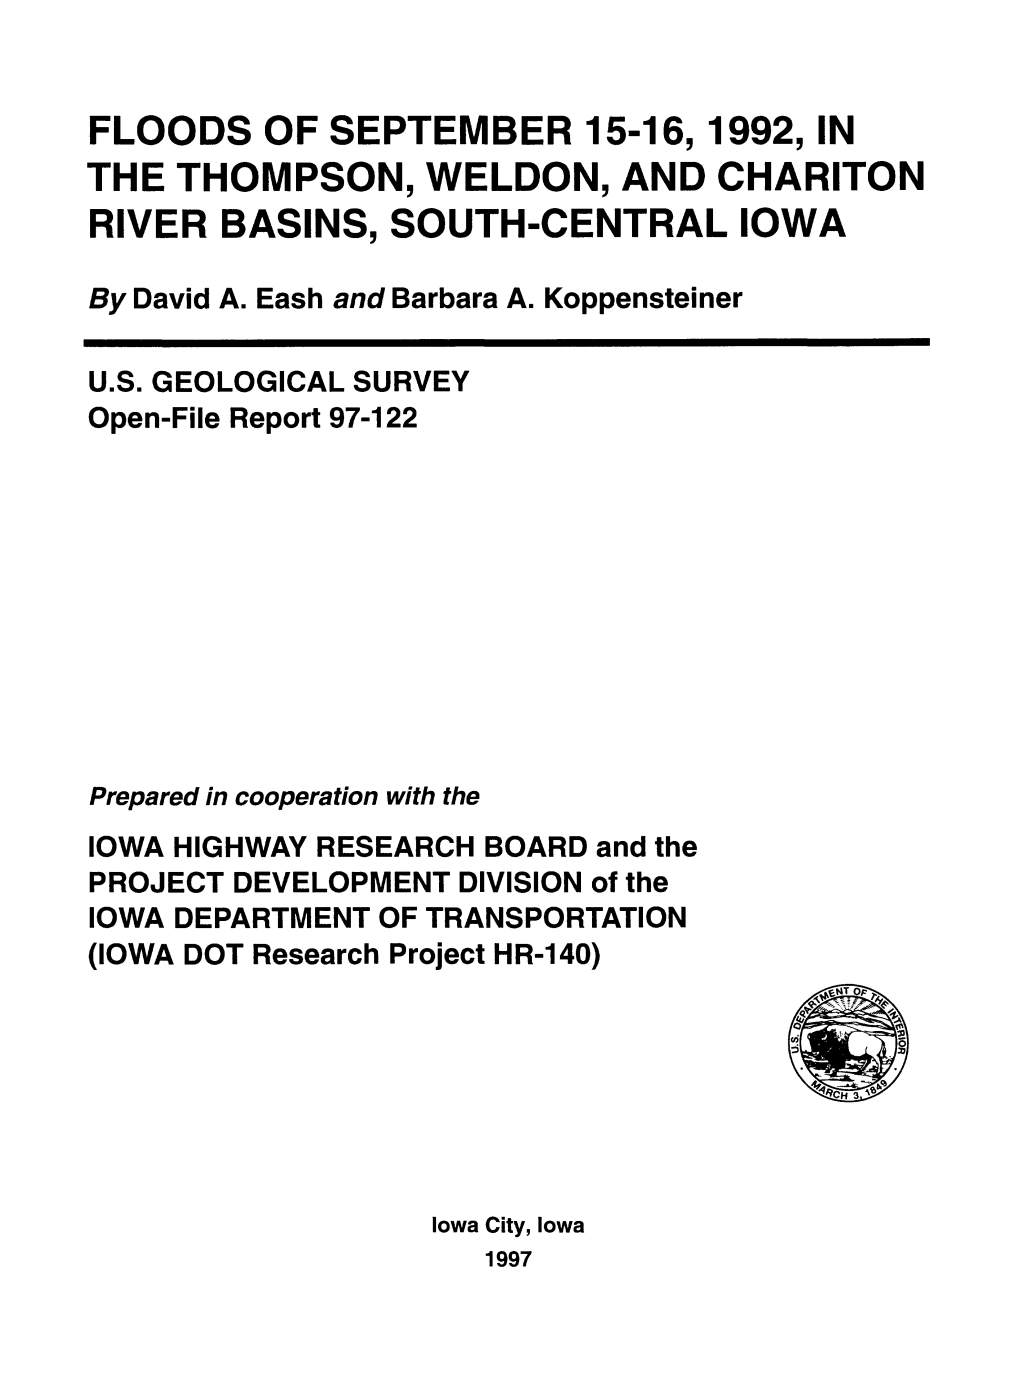 Floods of September 15-16, 1992, in the Thompson, Weldon, and Chariton River Basins, South-Central Iowa